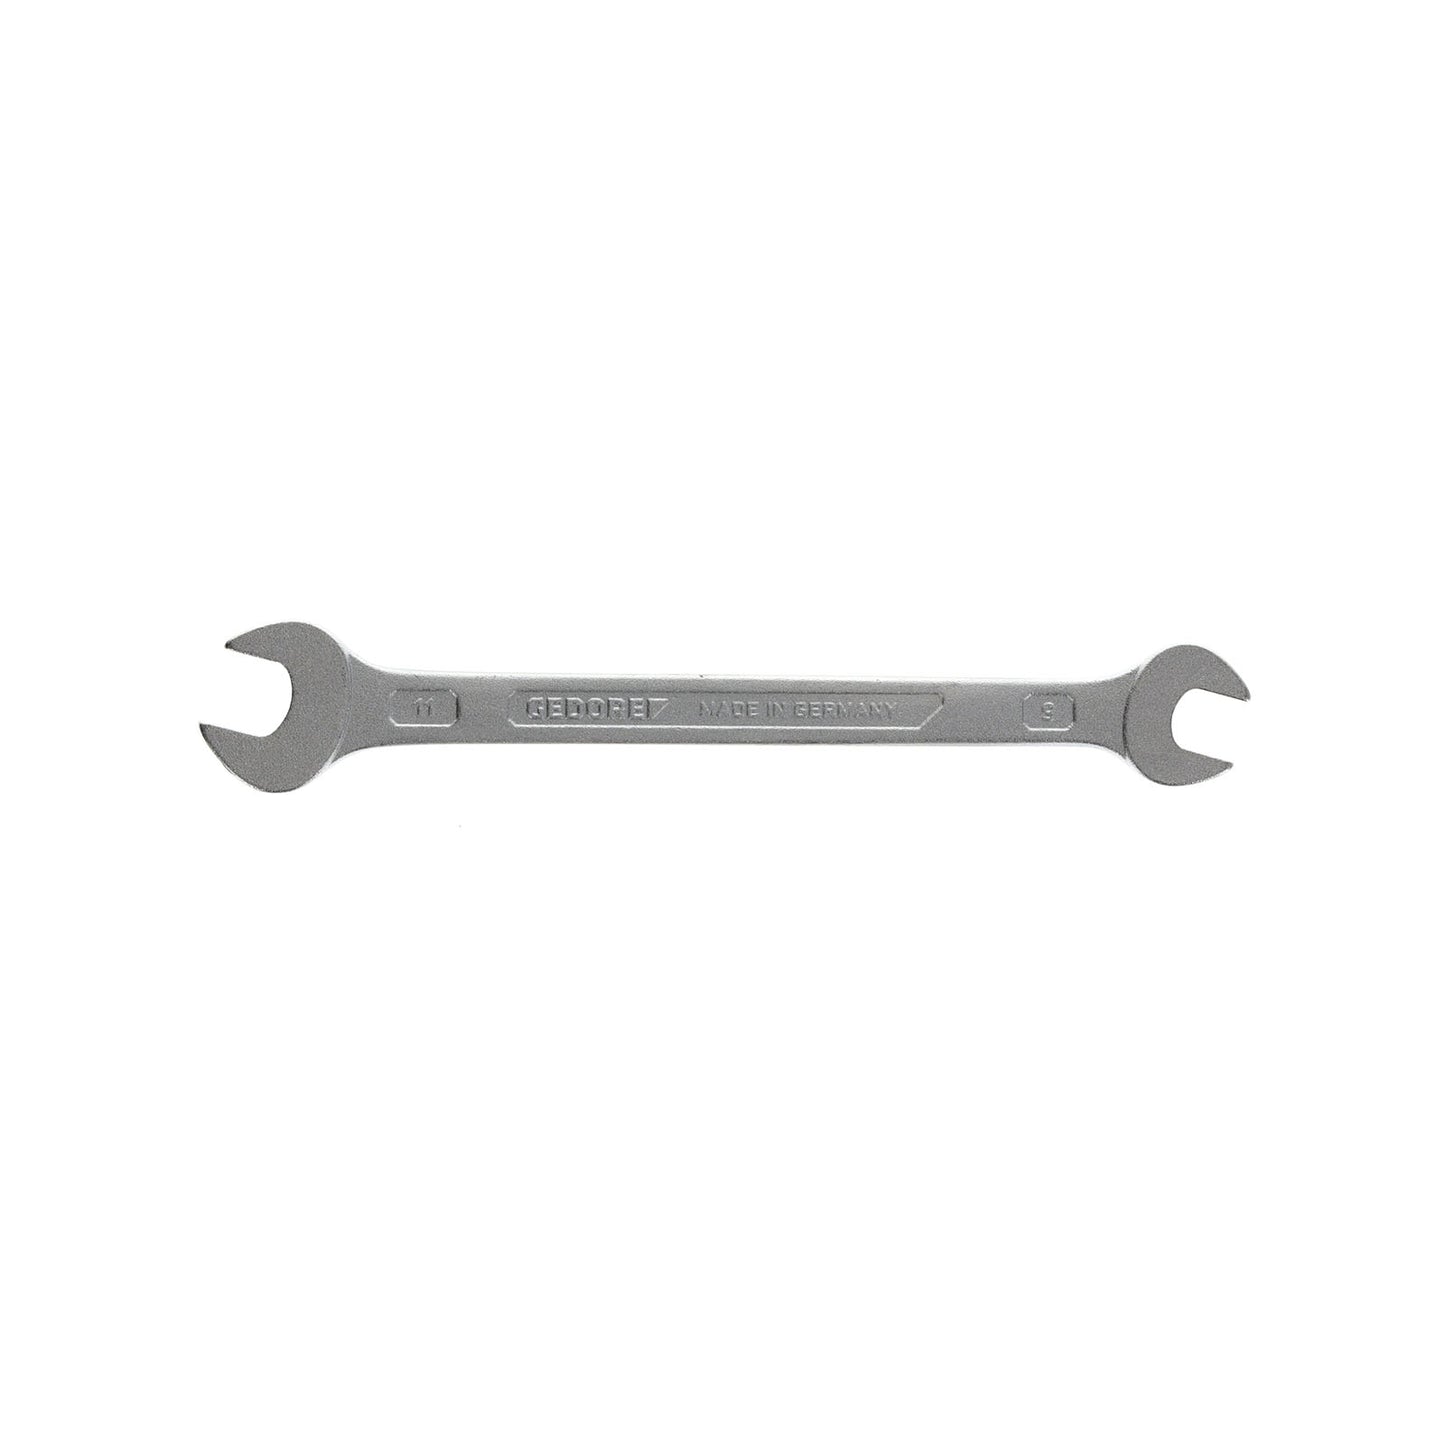 GEDORE 6 9X11 - 2-Mount Fixed Wrench, 9x11 (6064640)